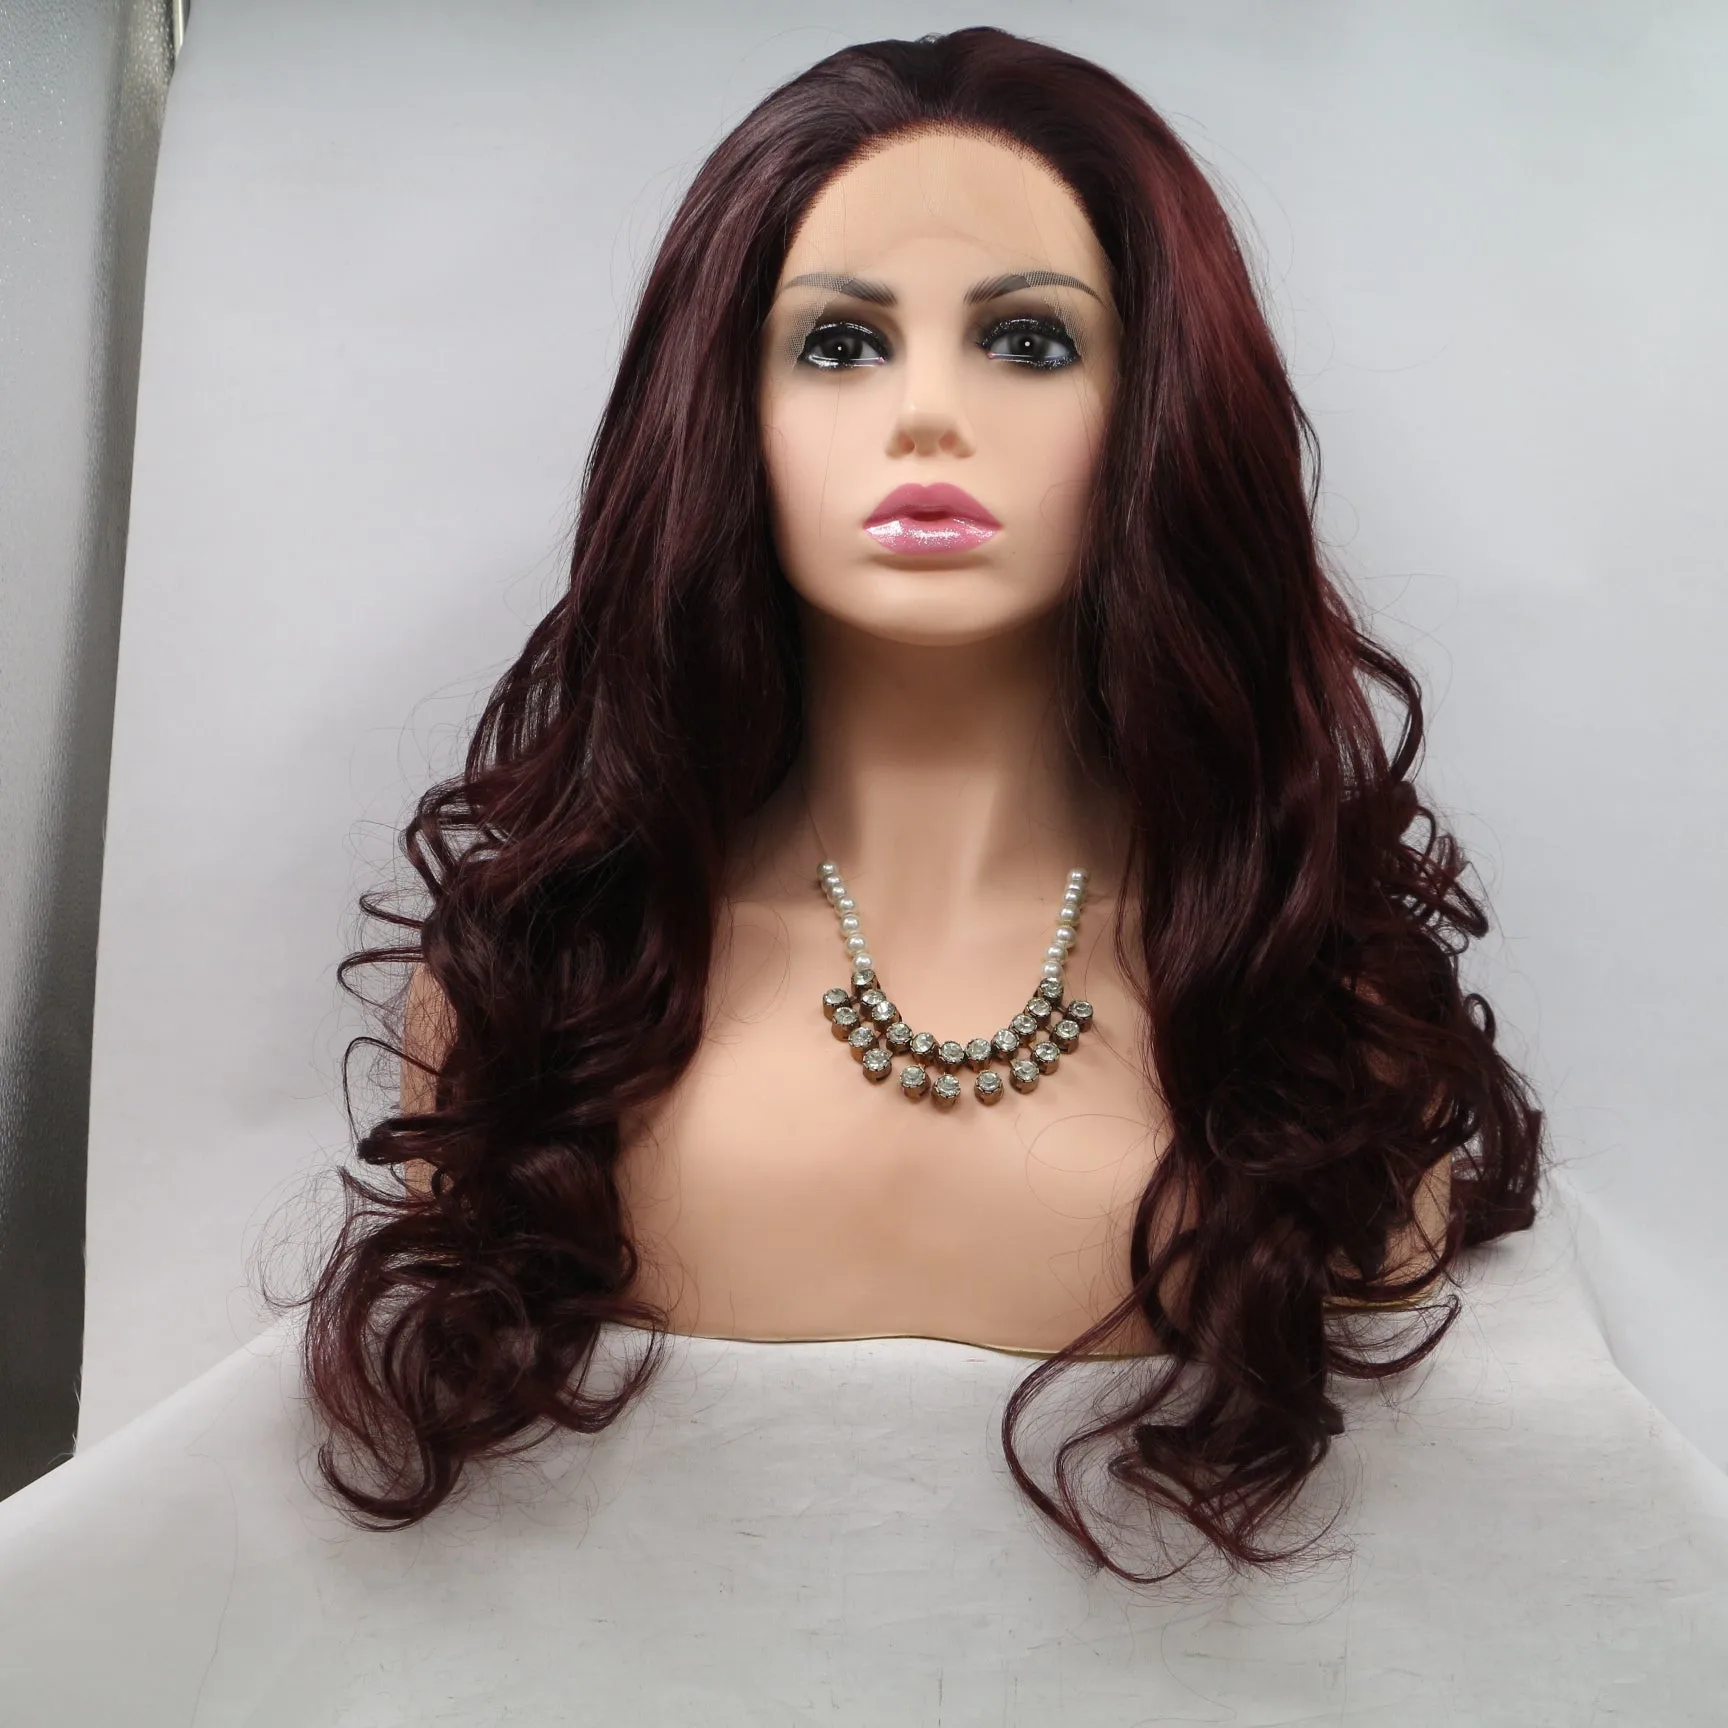 Iron Oxide Red Body Wave Long Women Wigs Lace Front High Heat Resistant Fiber Synthetic Hair Wig